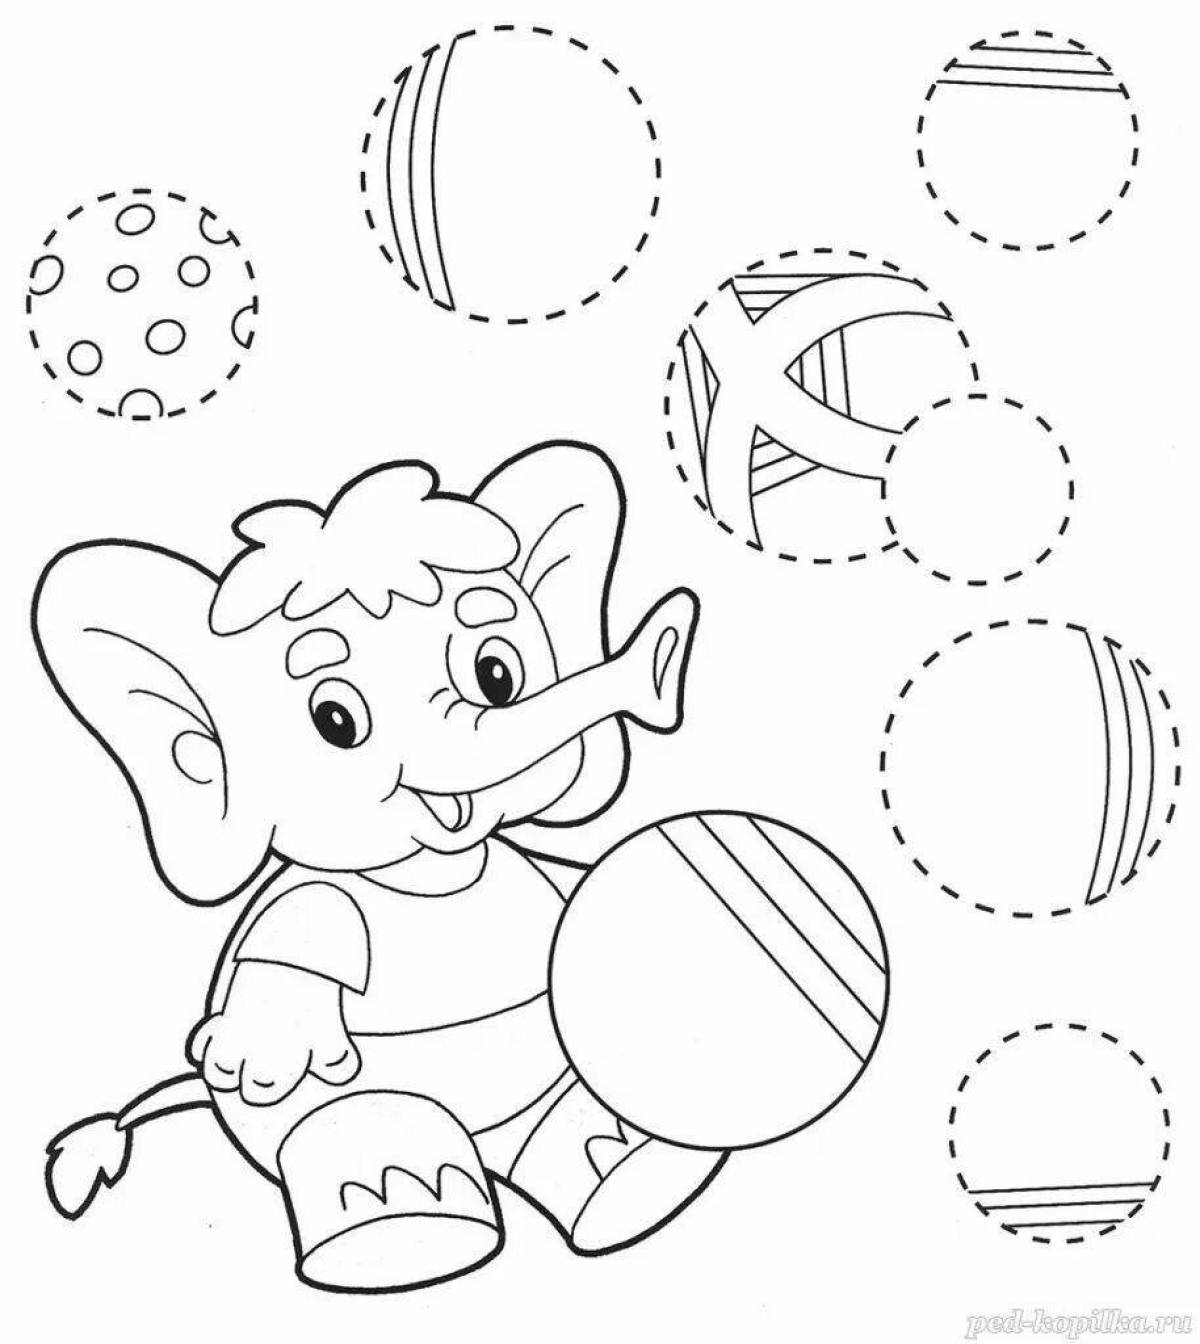 Stimulating coloring book for cognitive children 4-5 years old